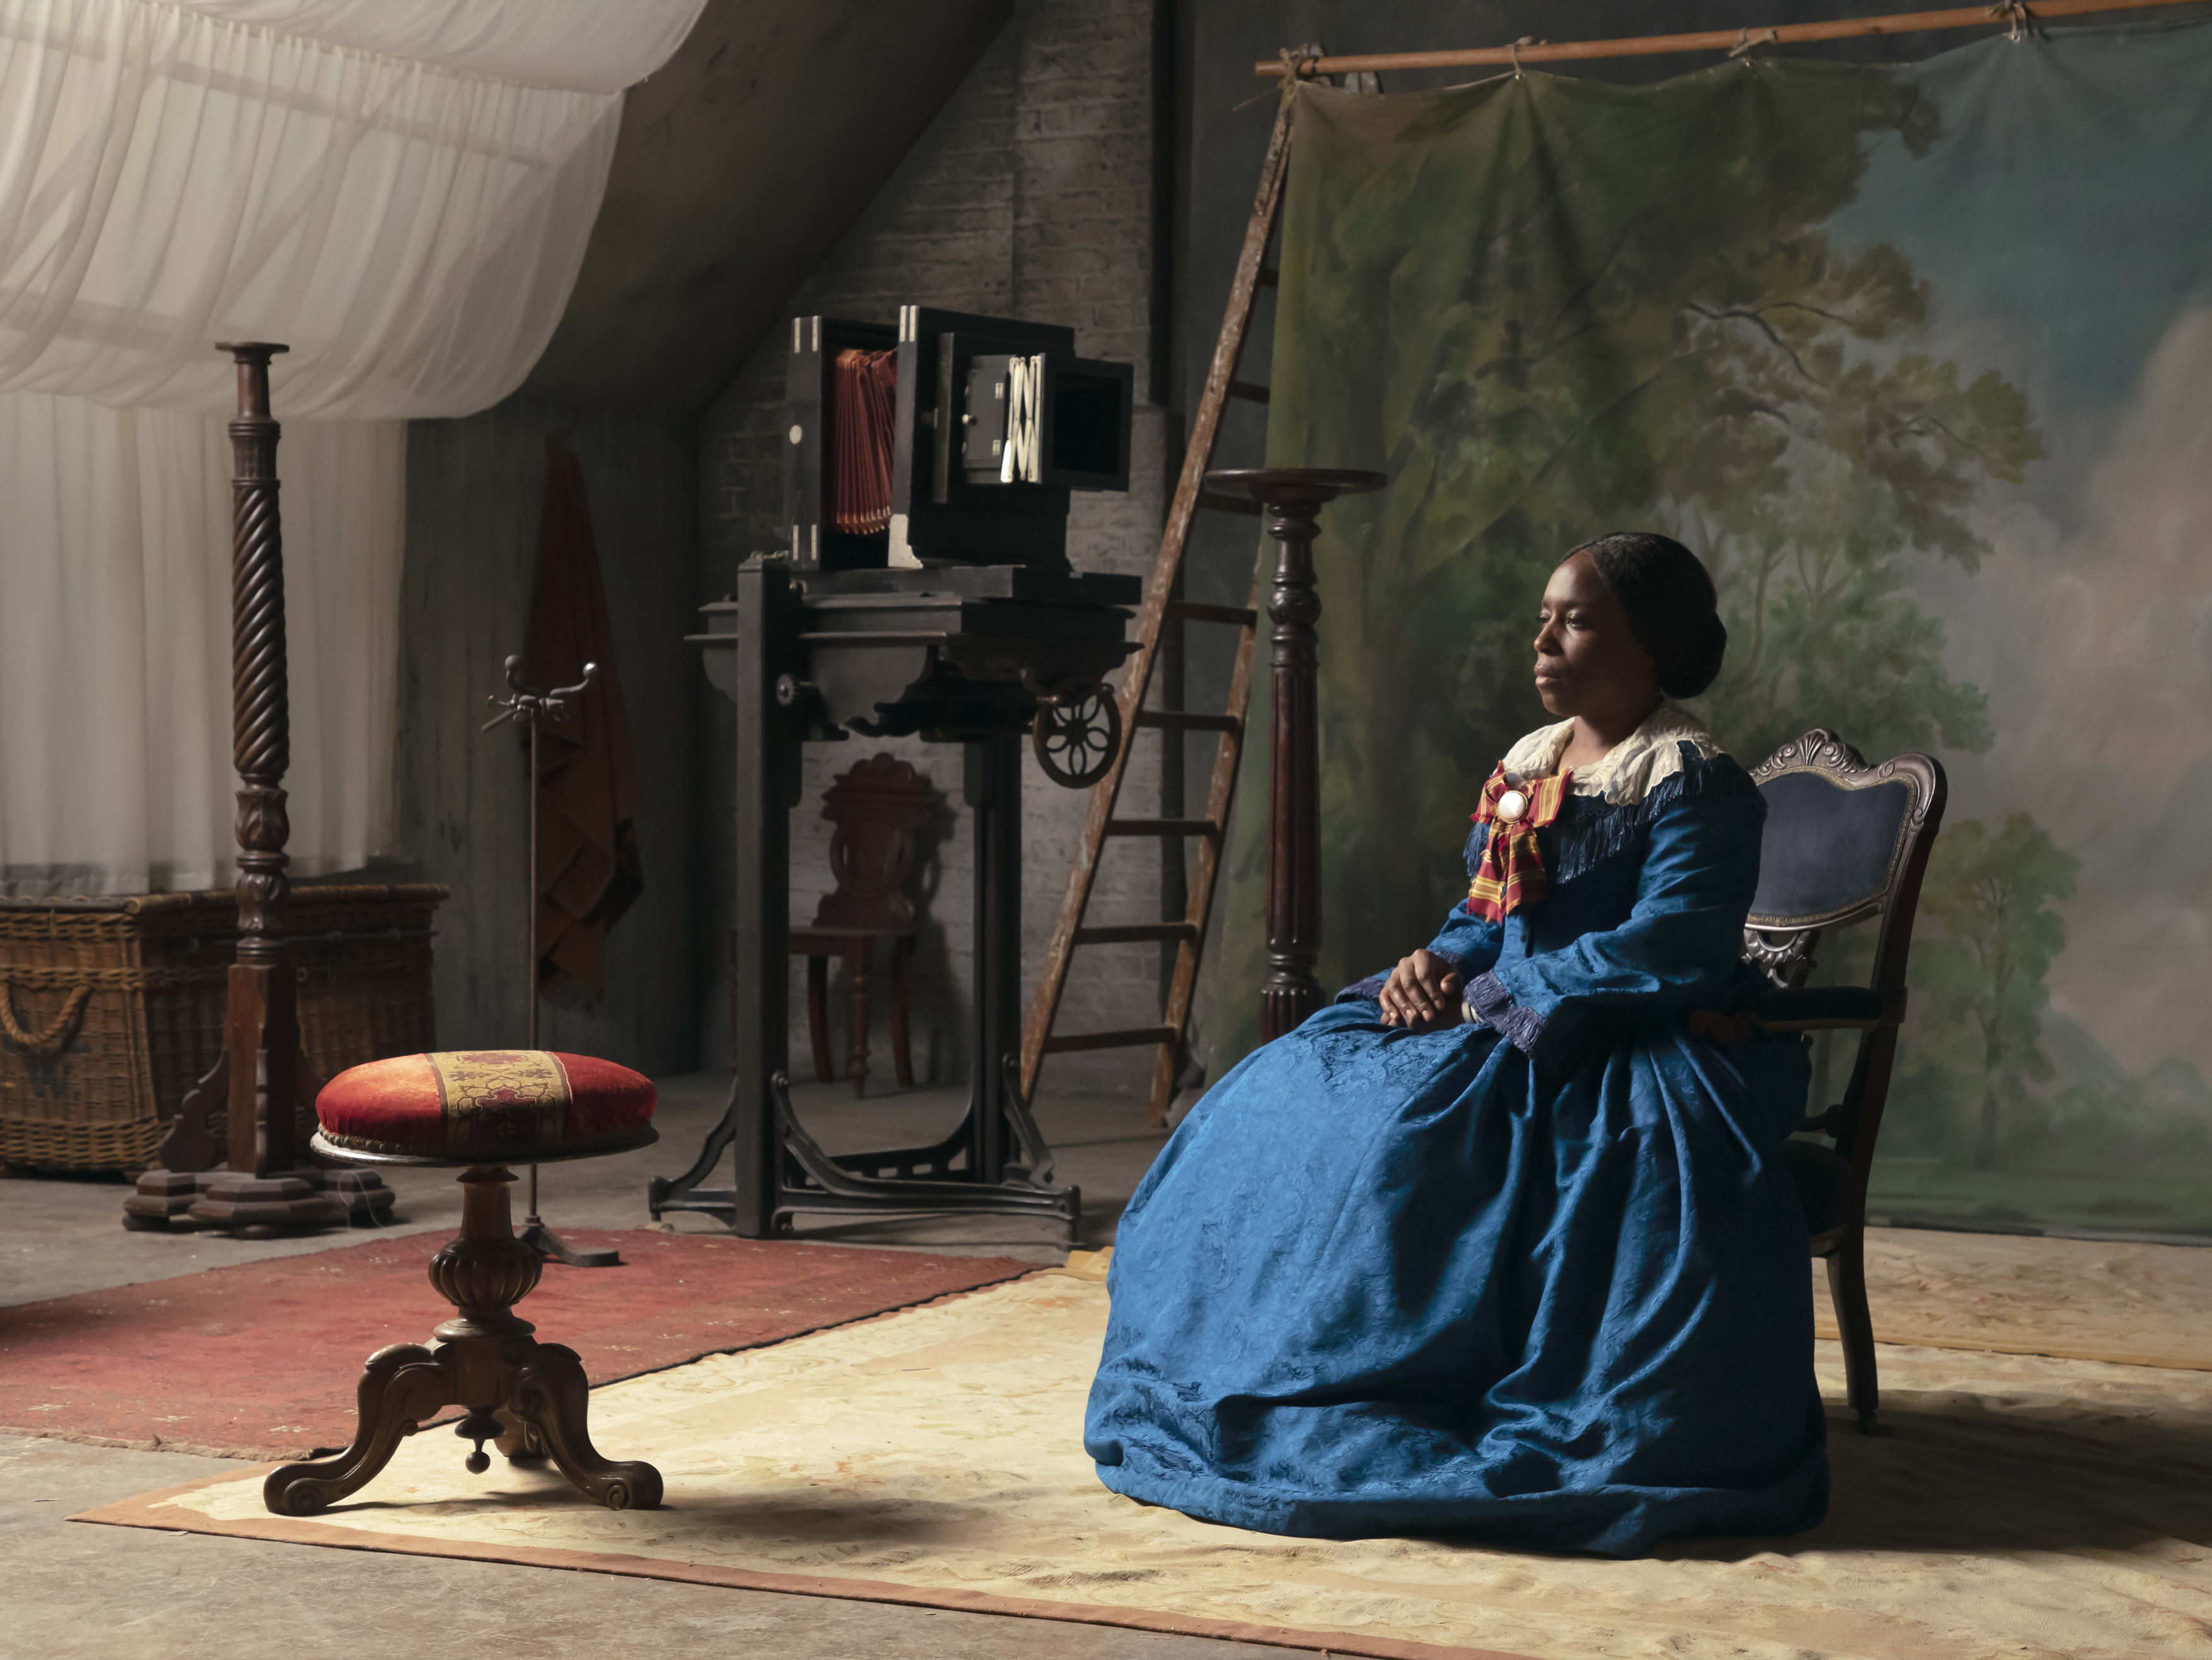 Photograph based on Isaac Julien's Lessons of the Hour of a woman in 19th century floor length saturated blue dress, sitting for a photo portrait